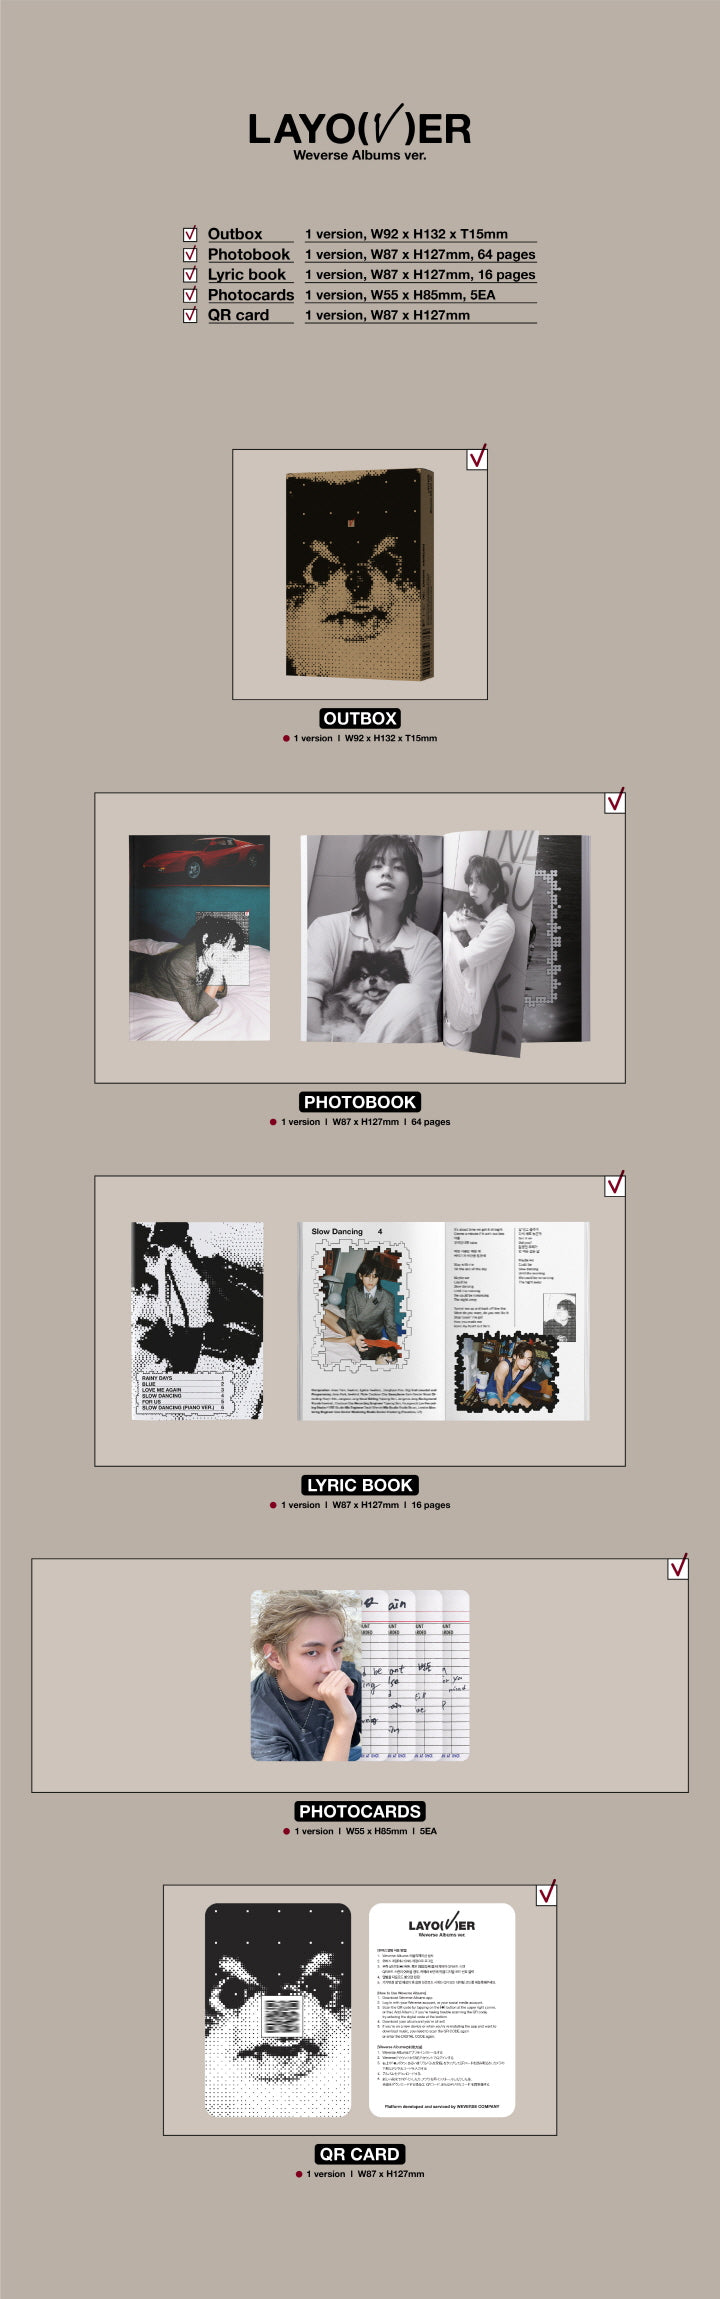 1 QR Card
1 Photo Book (64 pages)
1 Lyric Book (16 pages)
5 Photo Cards